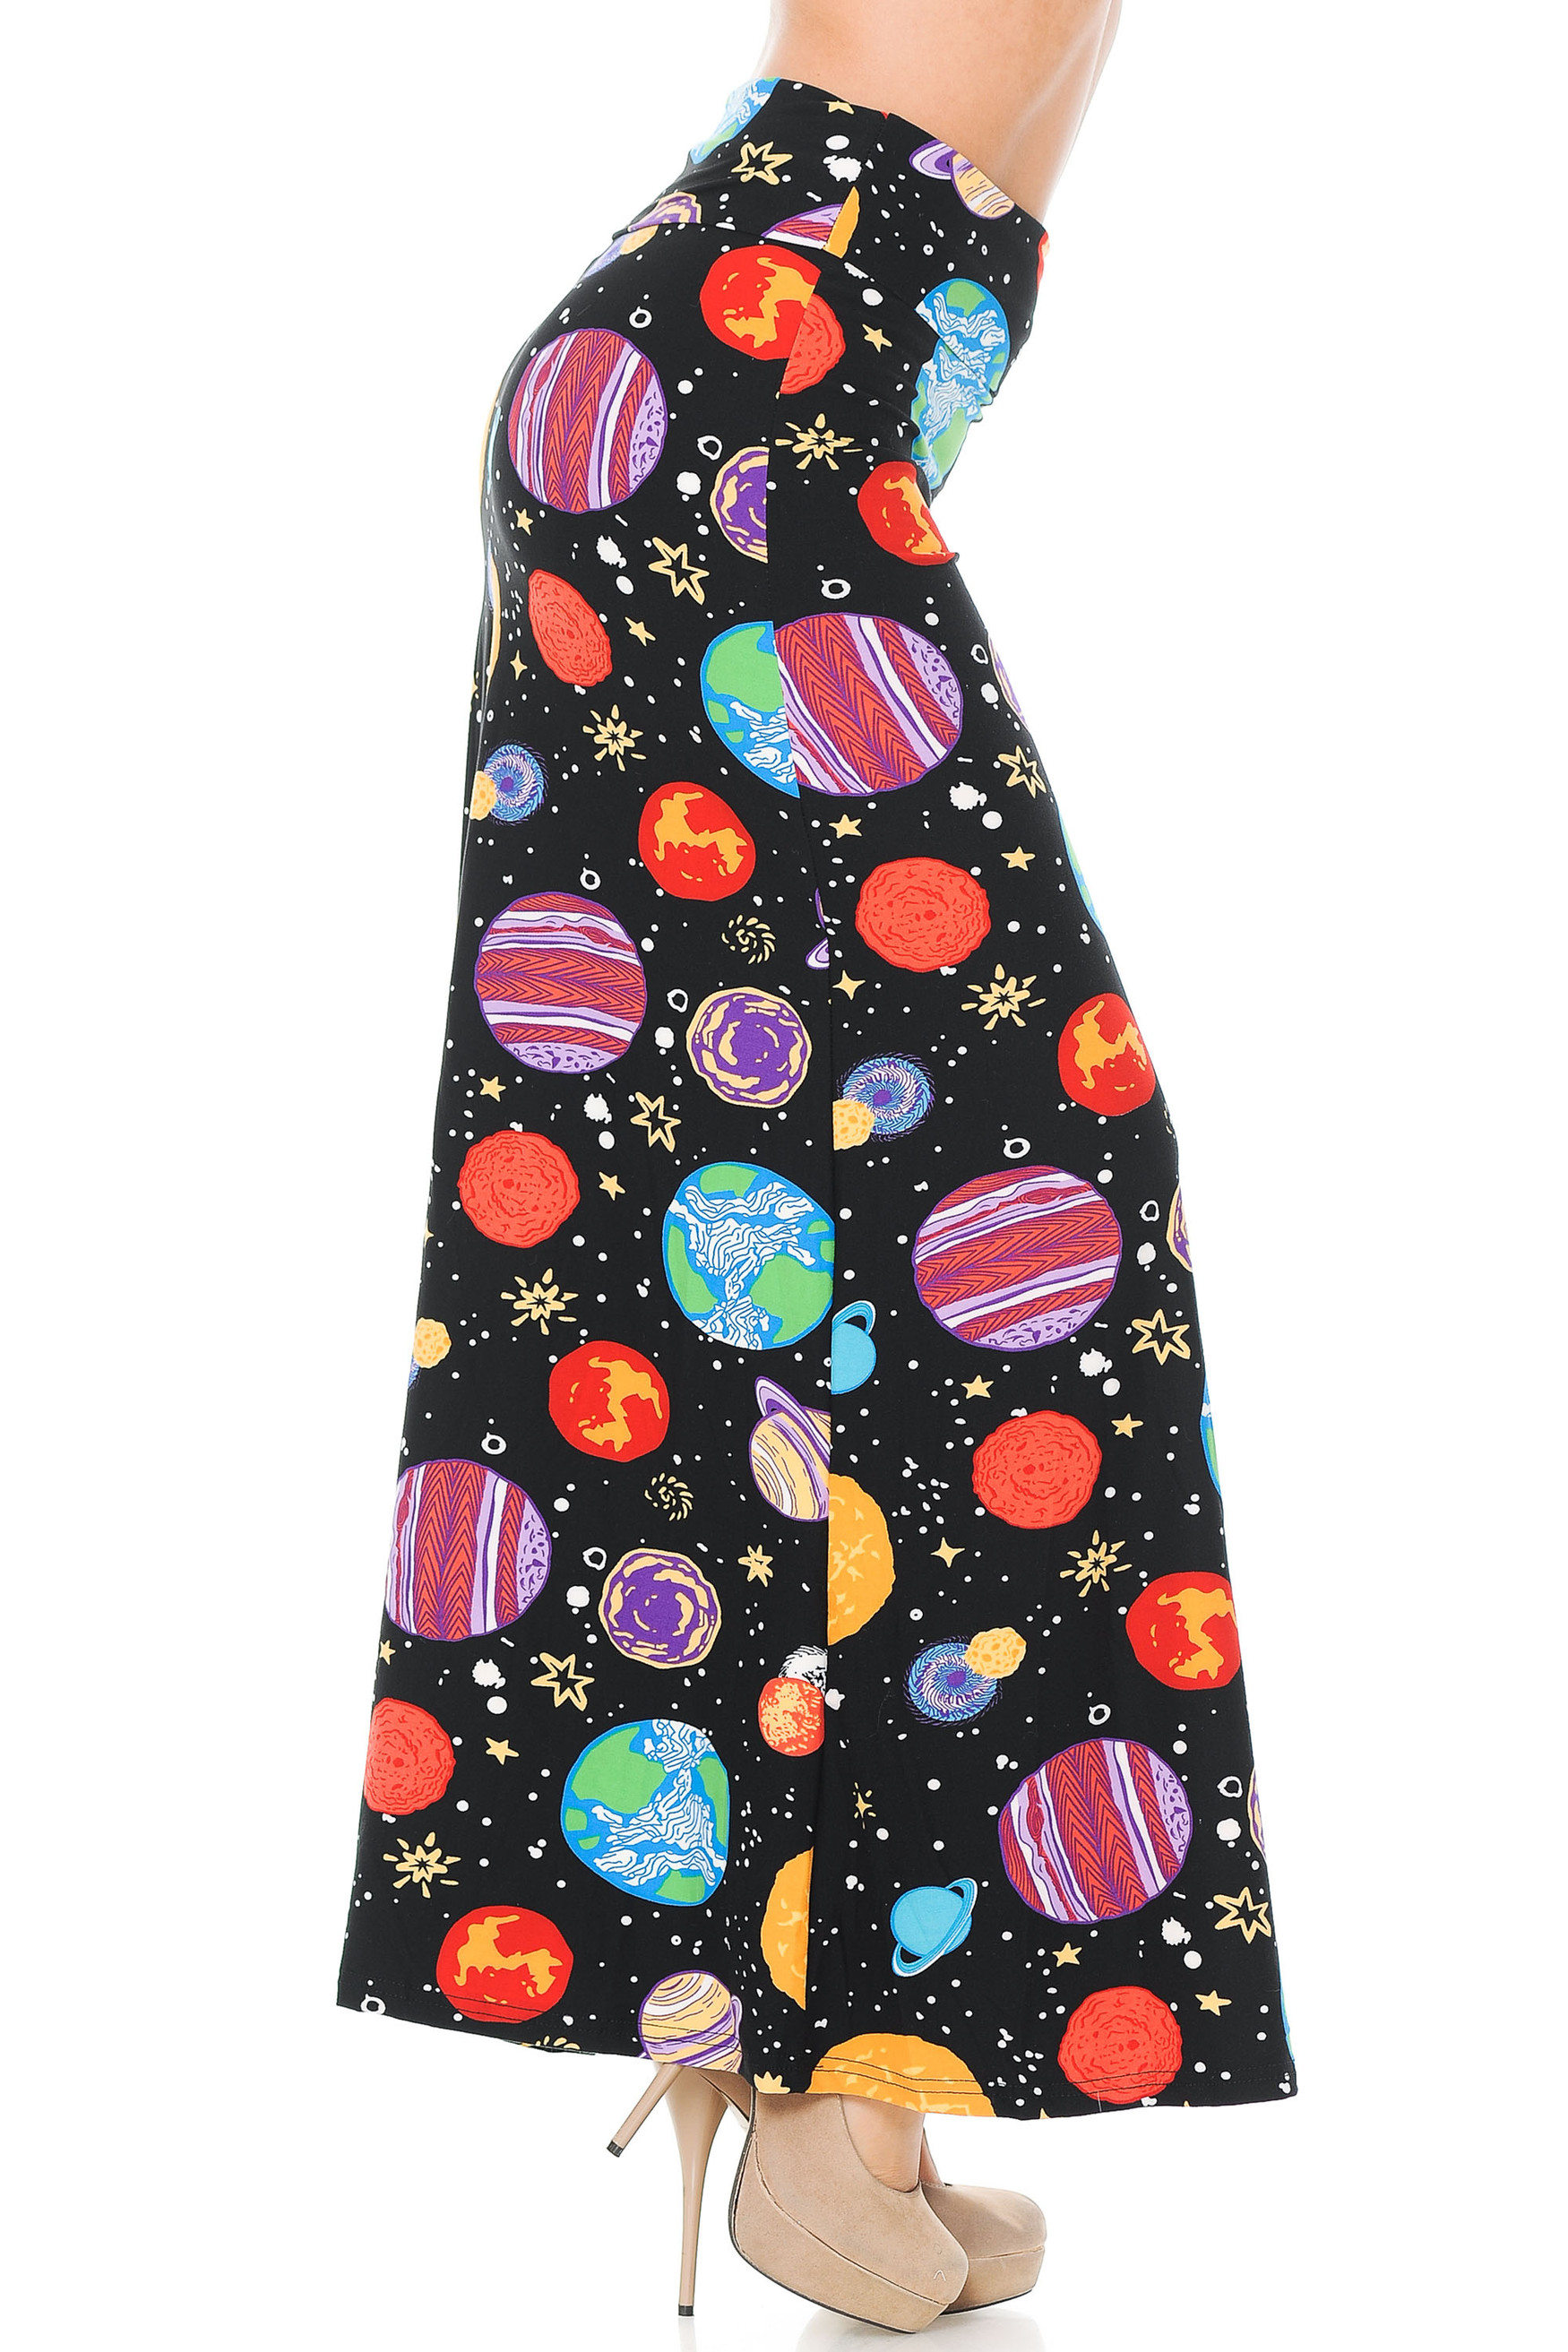 Brushed Planets in Space Maxi Skirt